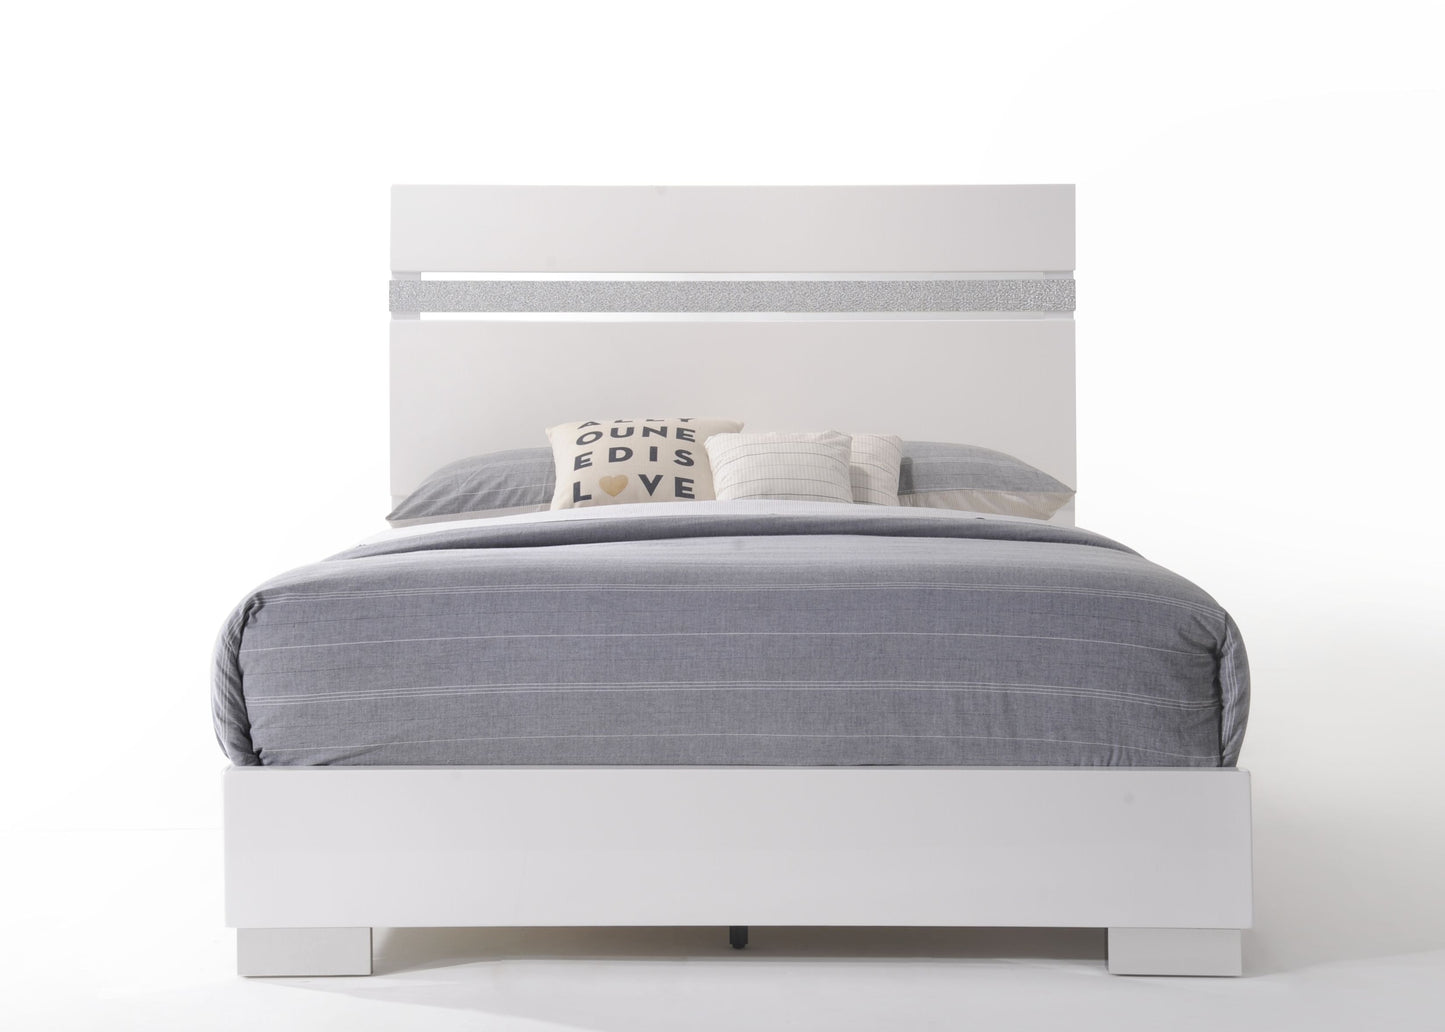 Naima II King Bedroom Set in White with Contrasting Gray